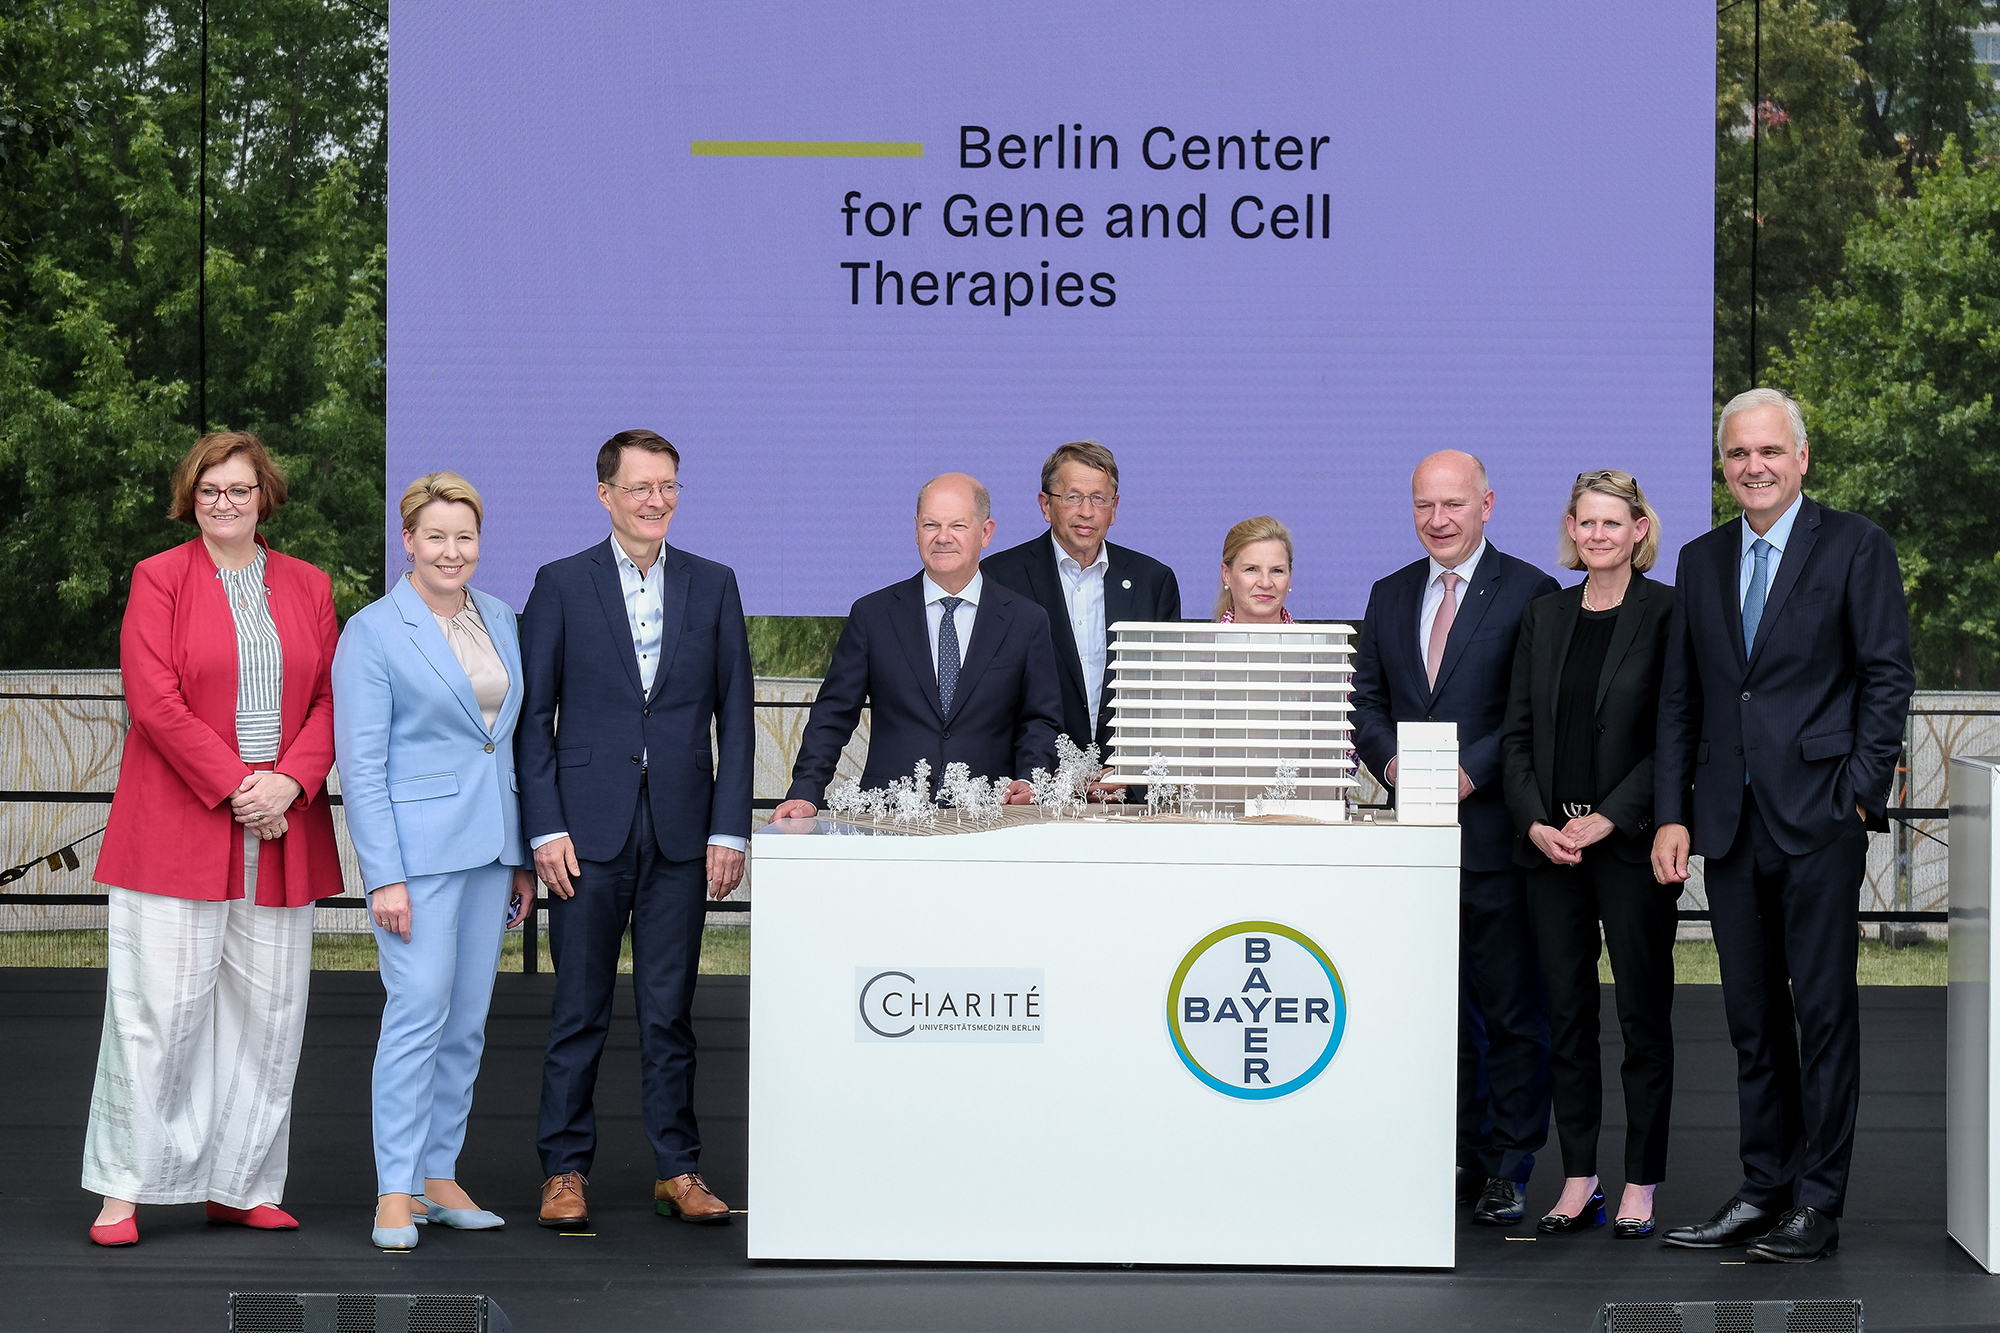 Berlin Center for Gene and Cell Therapies